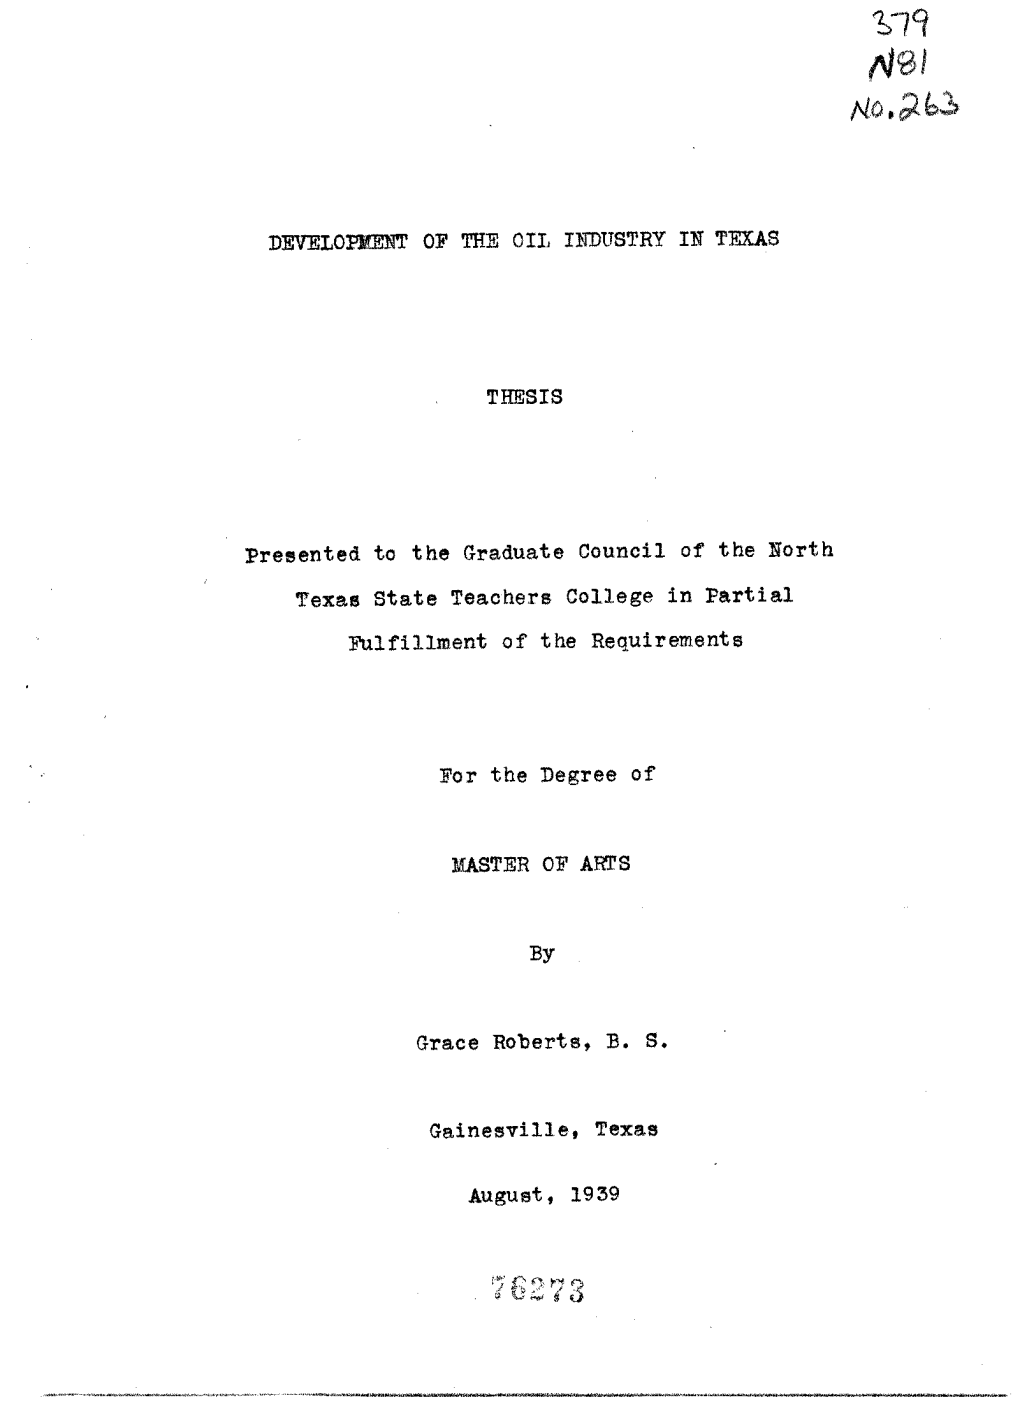 Dxwelop Et of the Oil Industry in Texas Thesis